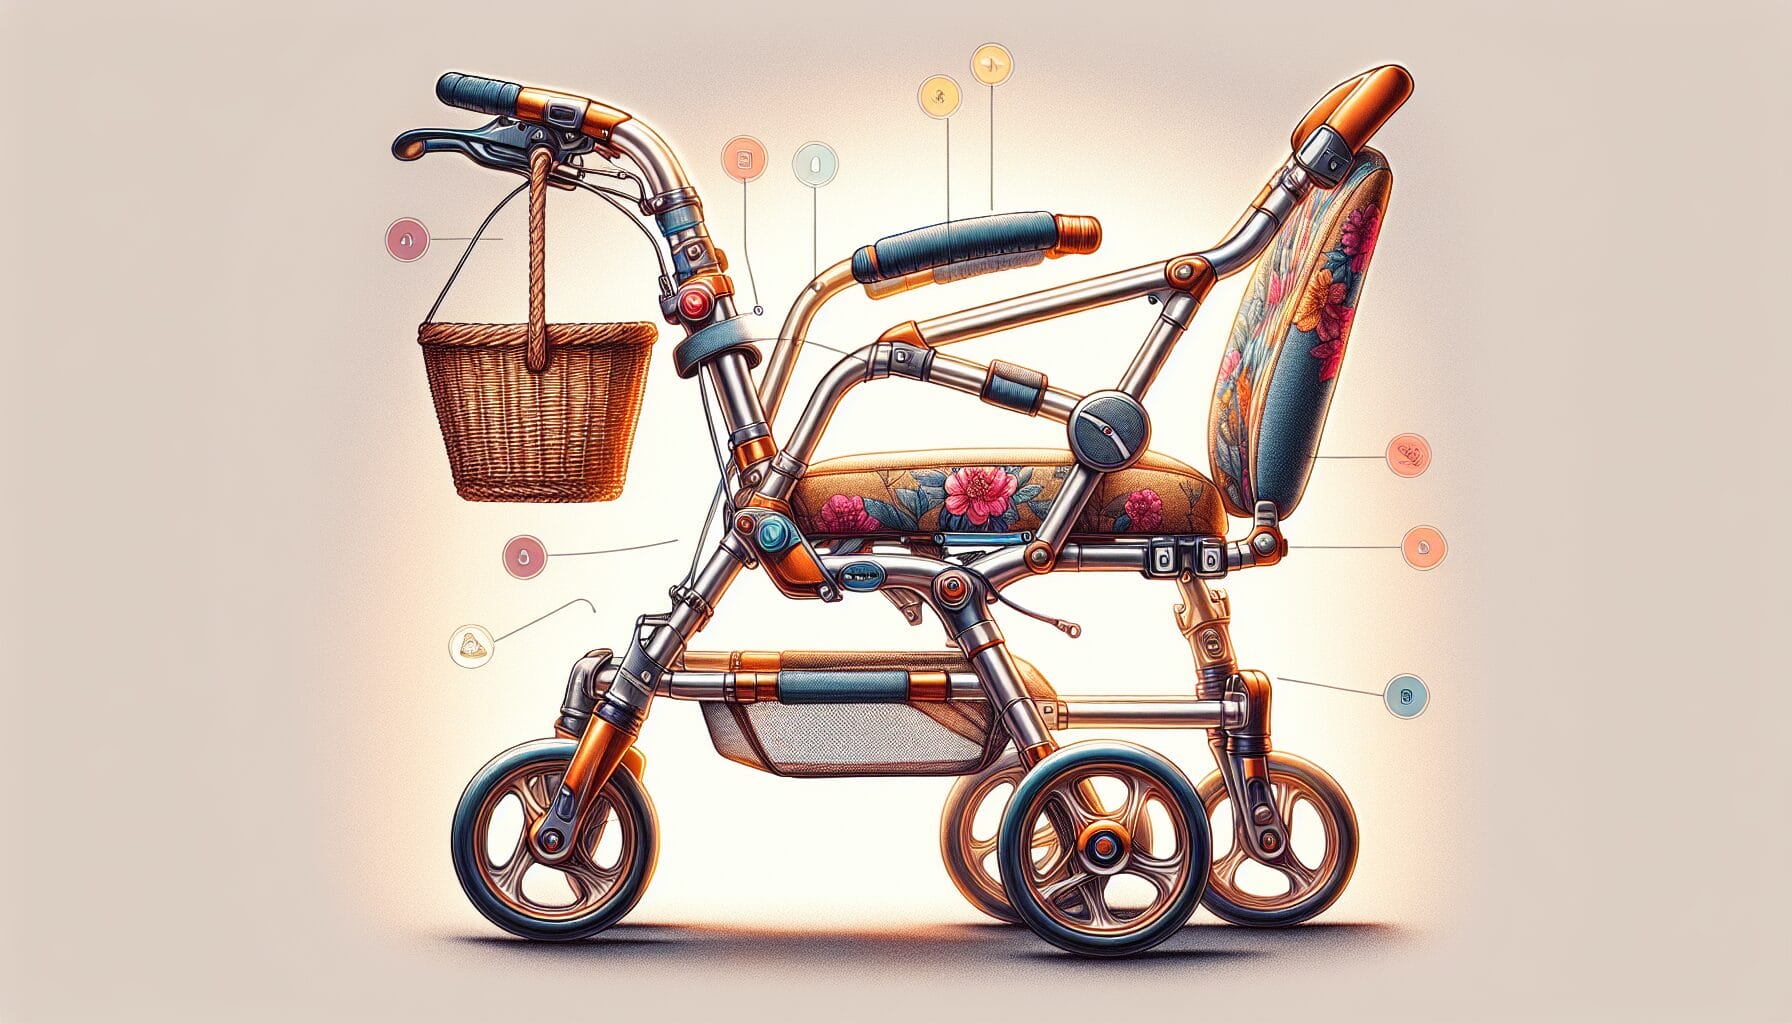 2nd Family - an Illustration of rollator accessories and customization options such as seat cushions, comfortable grips, and storage baskets